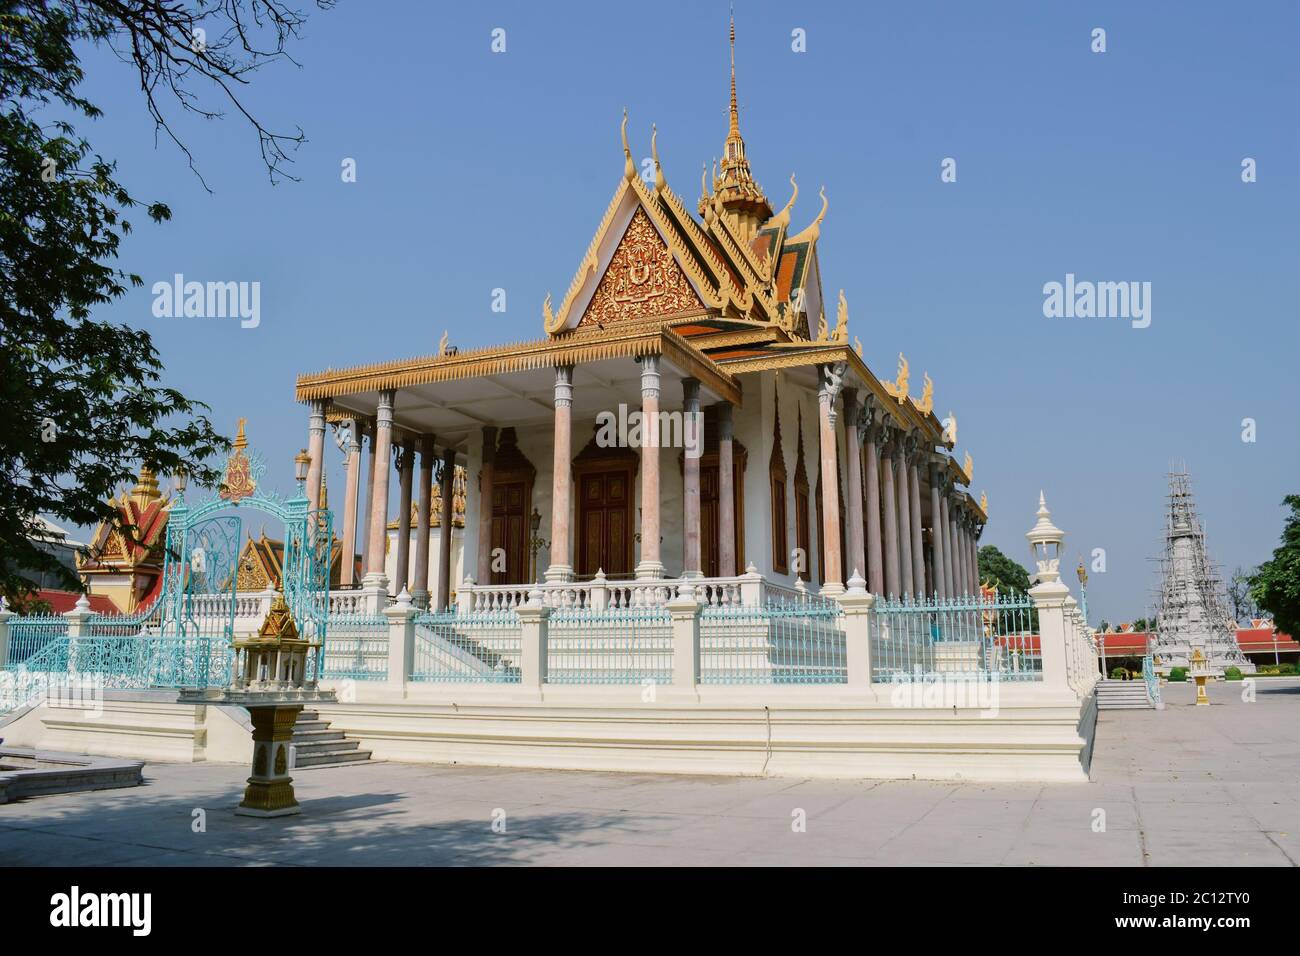 Touristy golden shrine in the Phnom Penh Royal Palace in Cambodia Stock Photo